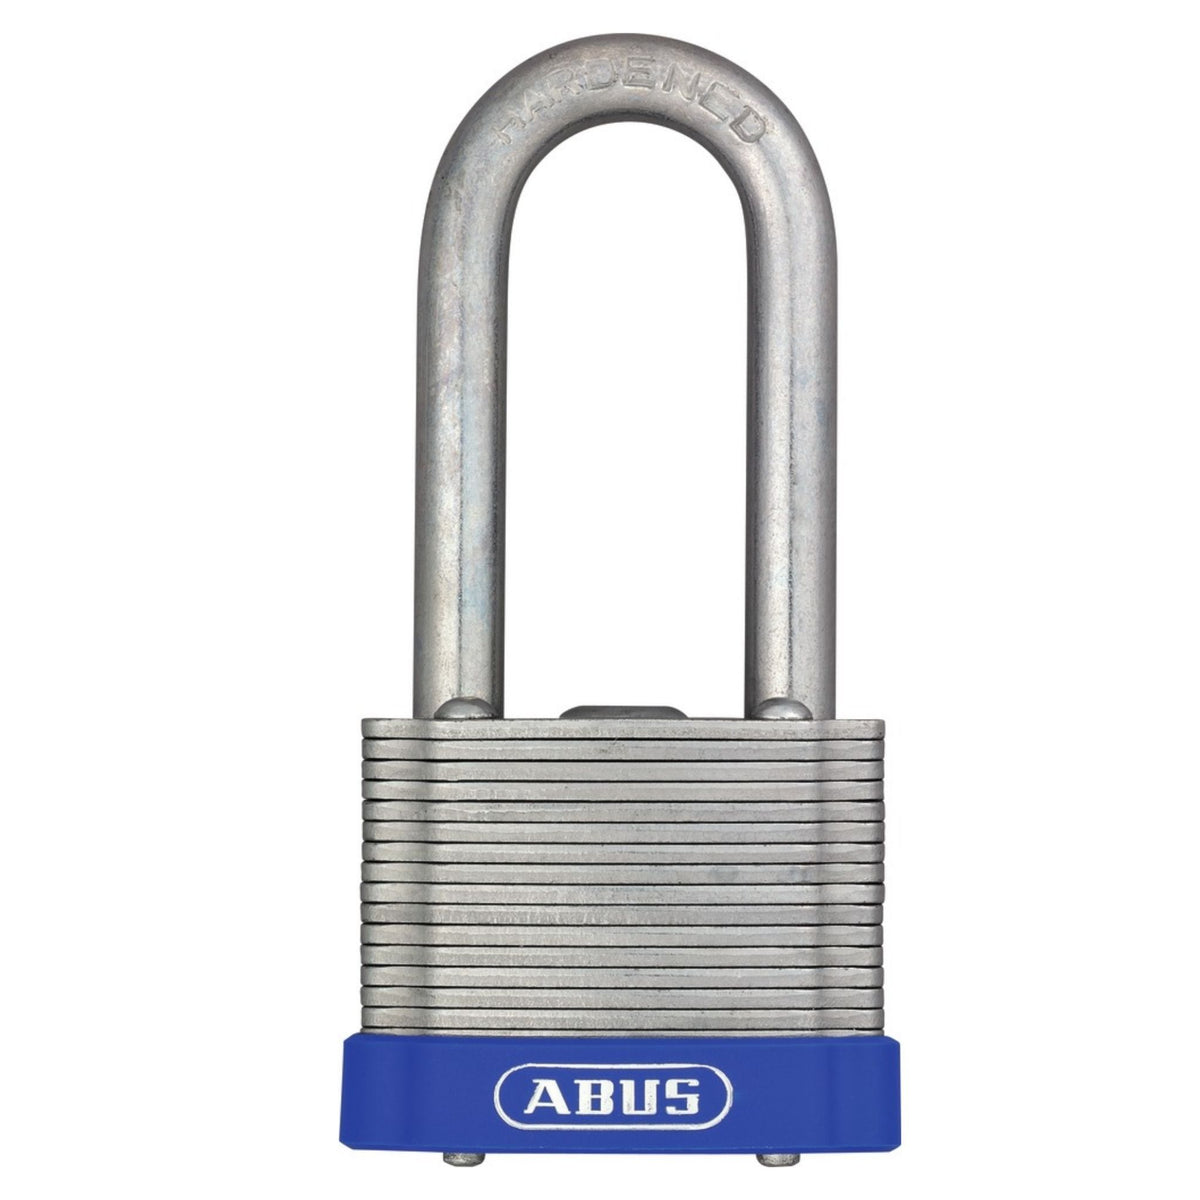 Abus 41/50HB50 KD Laminated Steel Padlock with Eterna Coating and 2-Inch Shackle - The Lock Source